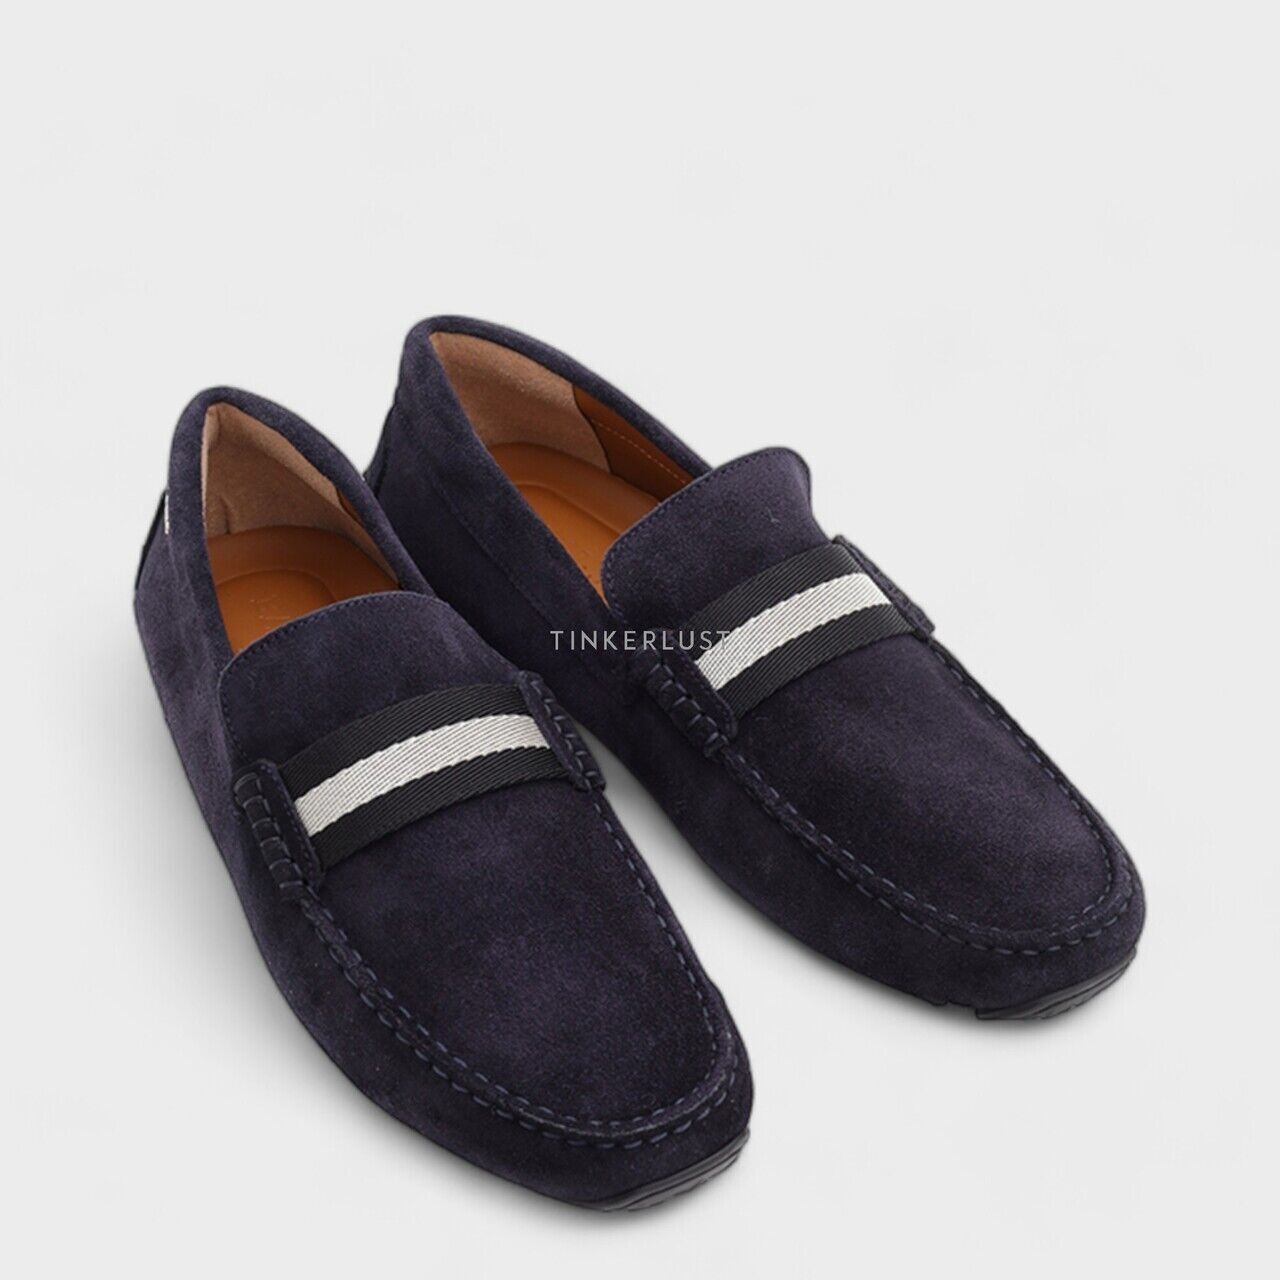 Bally Driver Pearce Navy Blue Suede with Trainspotting Stripe Loafers